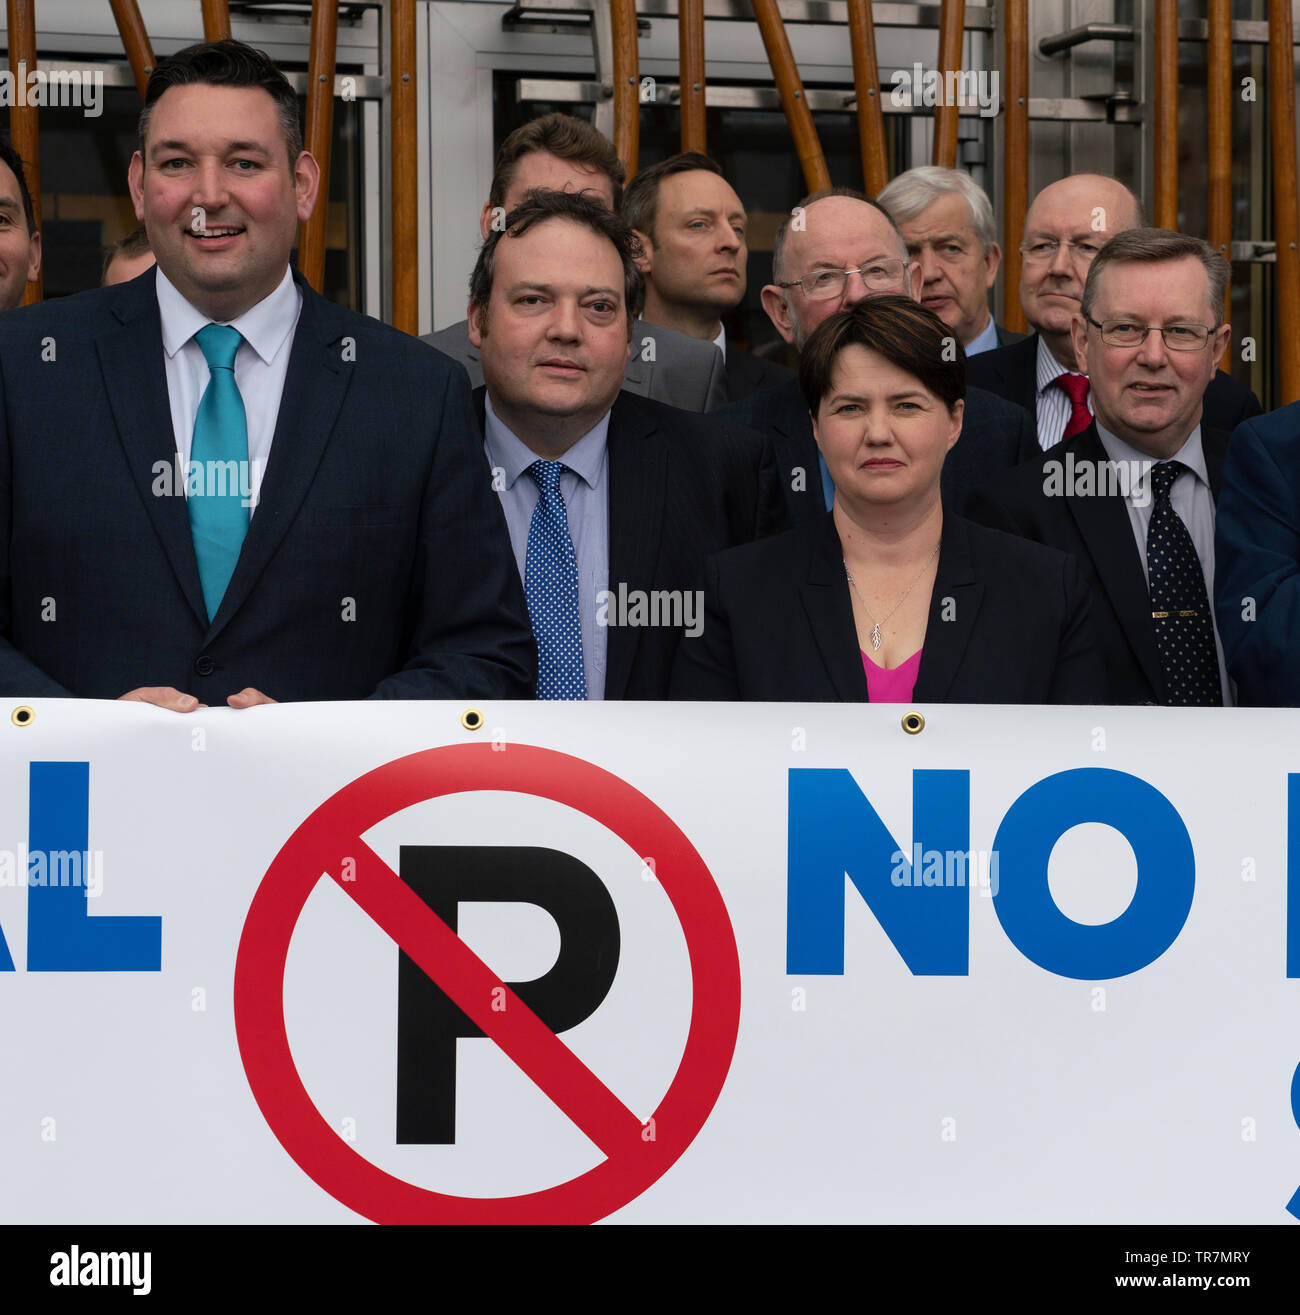 Edinburgh, Scotland, UK. 30th May, 2019. The Scottish Conservative party launched a hospital parking campaign at the Scottish Parliament in Holyrood in Edinburgh. The Scottish Conservatives believe that car parking charges are too expensive at Scottish hospitals. Credit: Iain Masterton/Alamy Live News Stock Photo